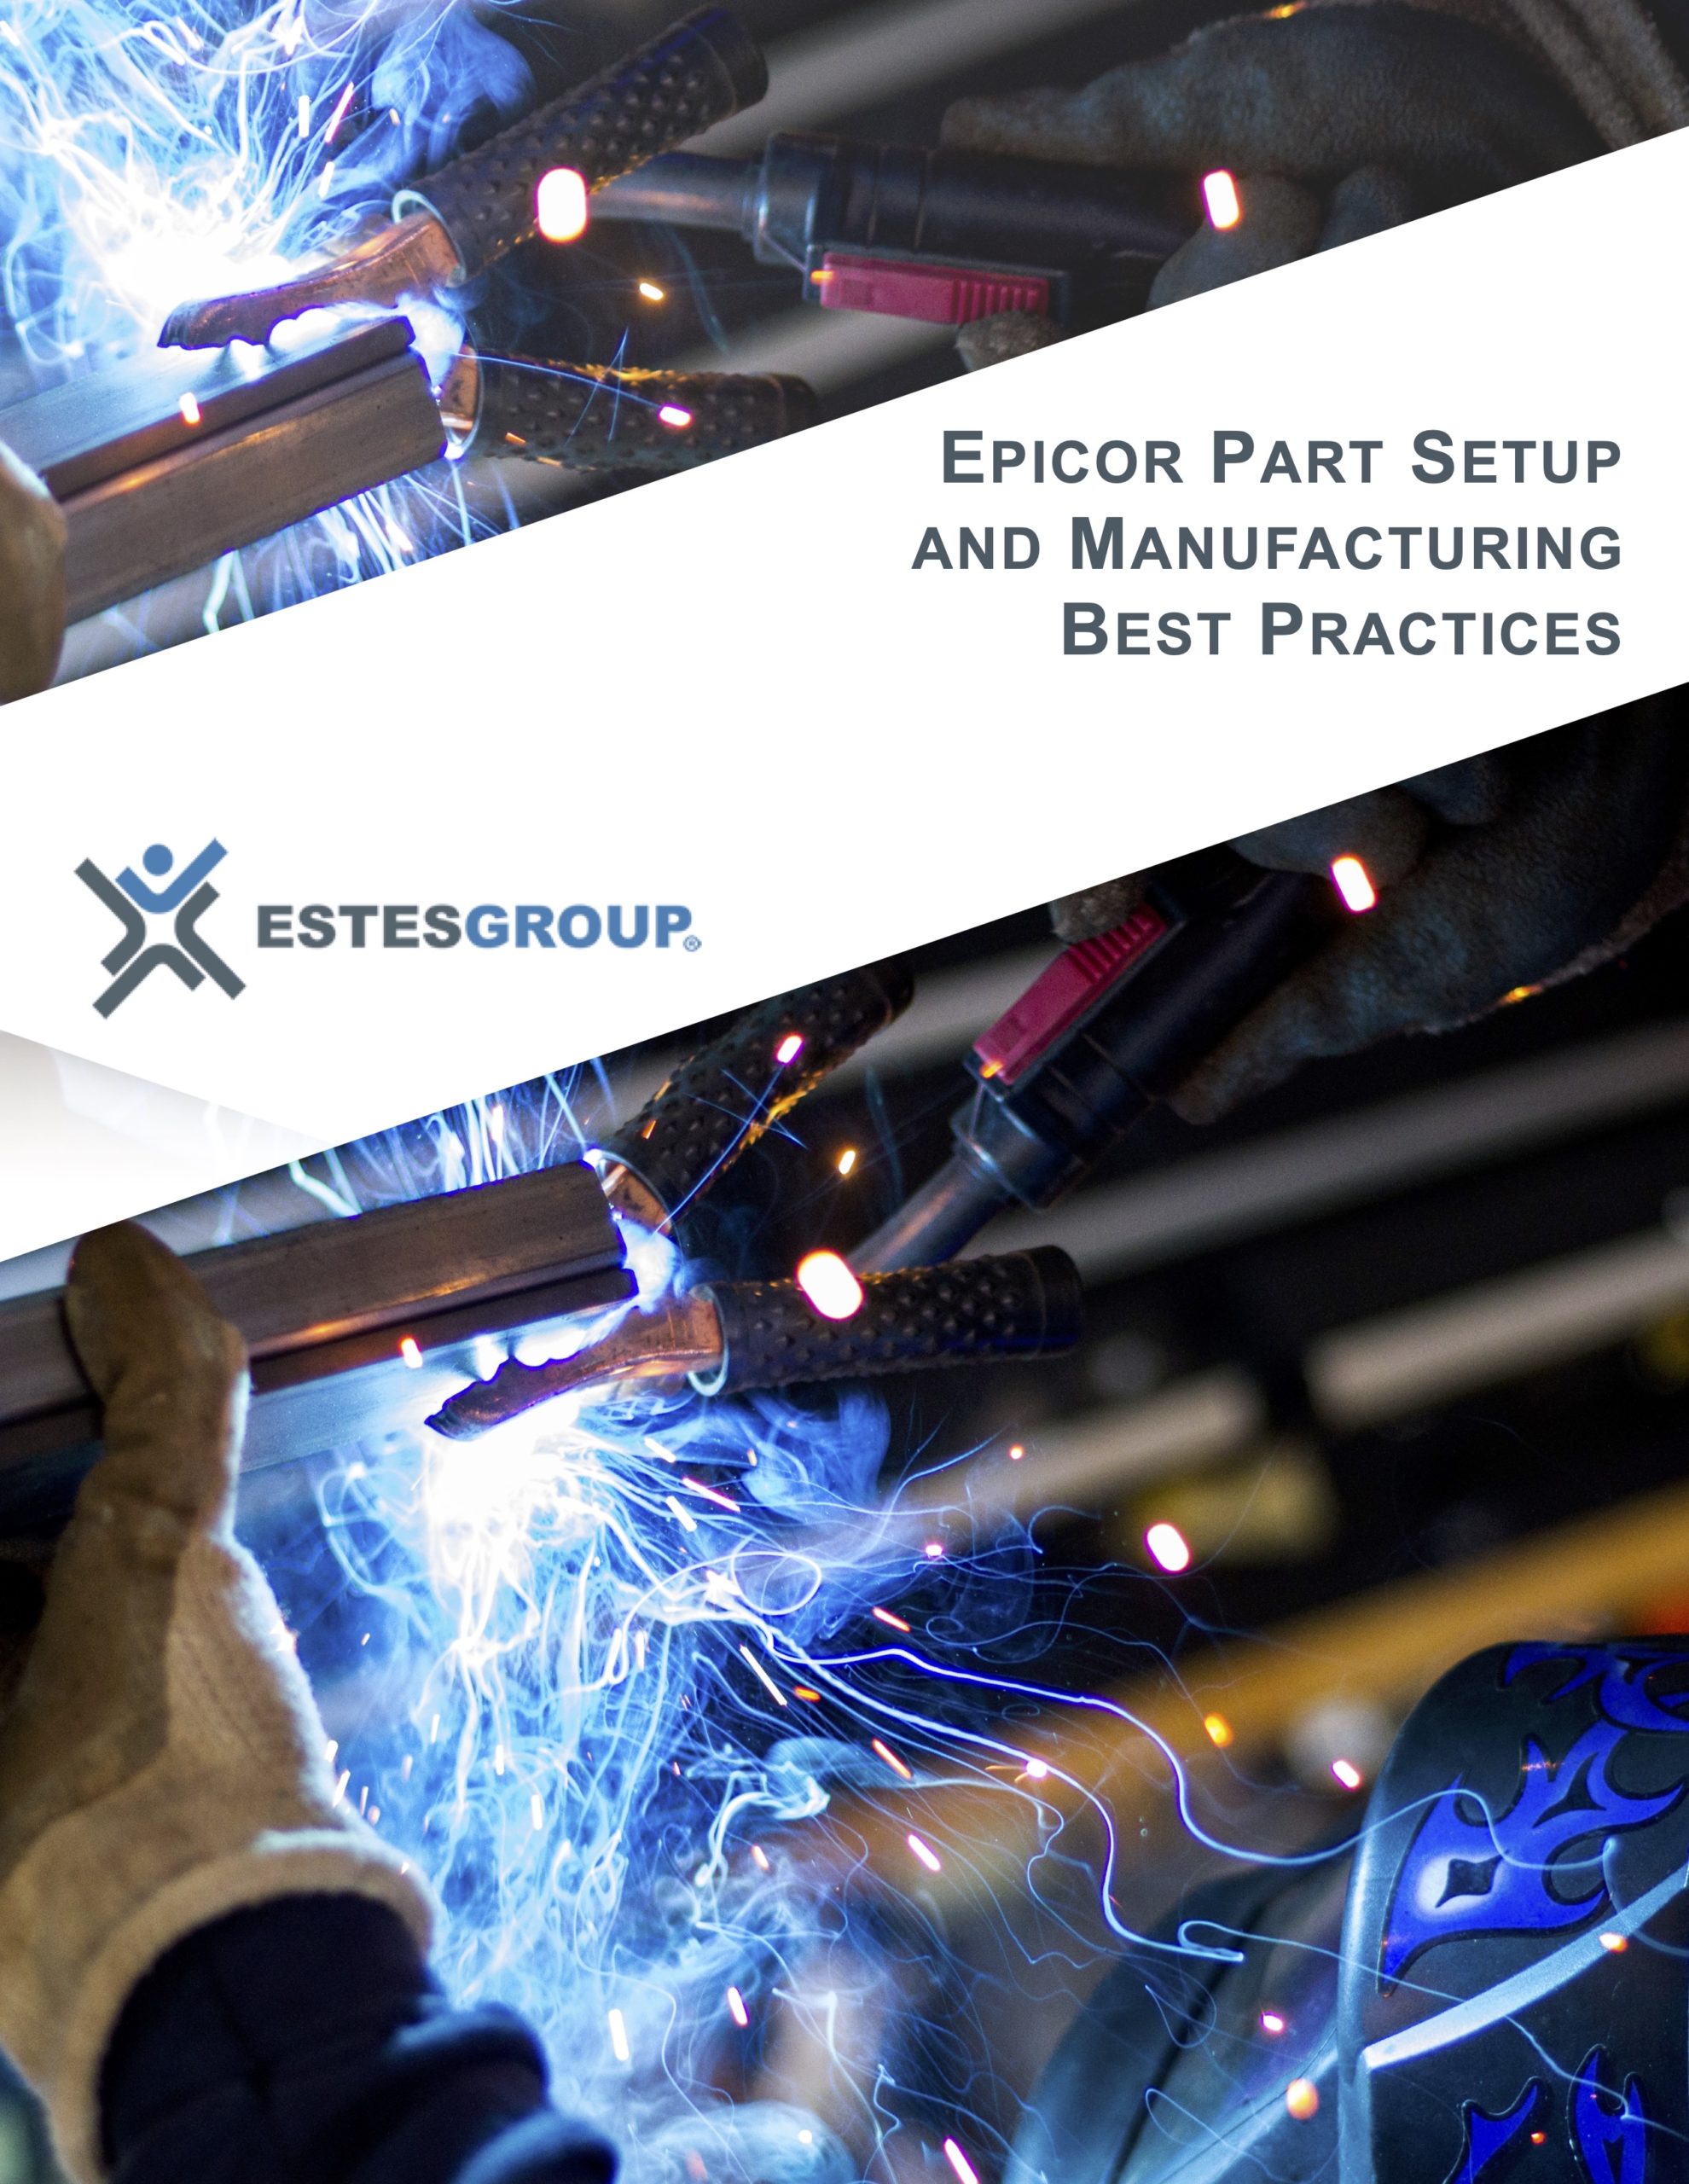 Epicor Part Setup and Manufacturing Best Practices